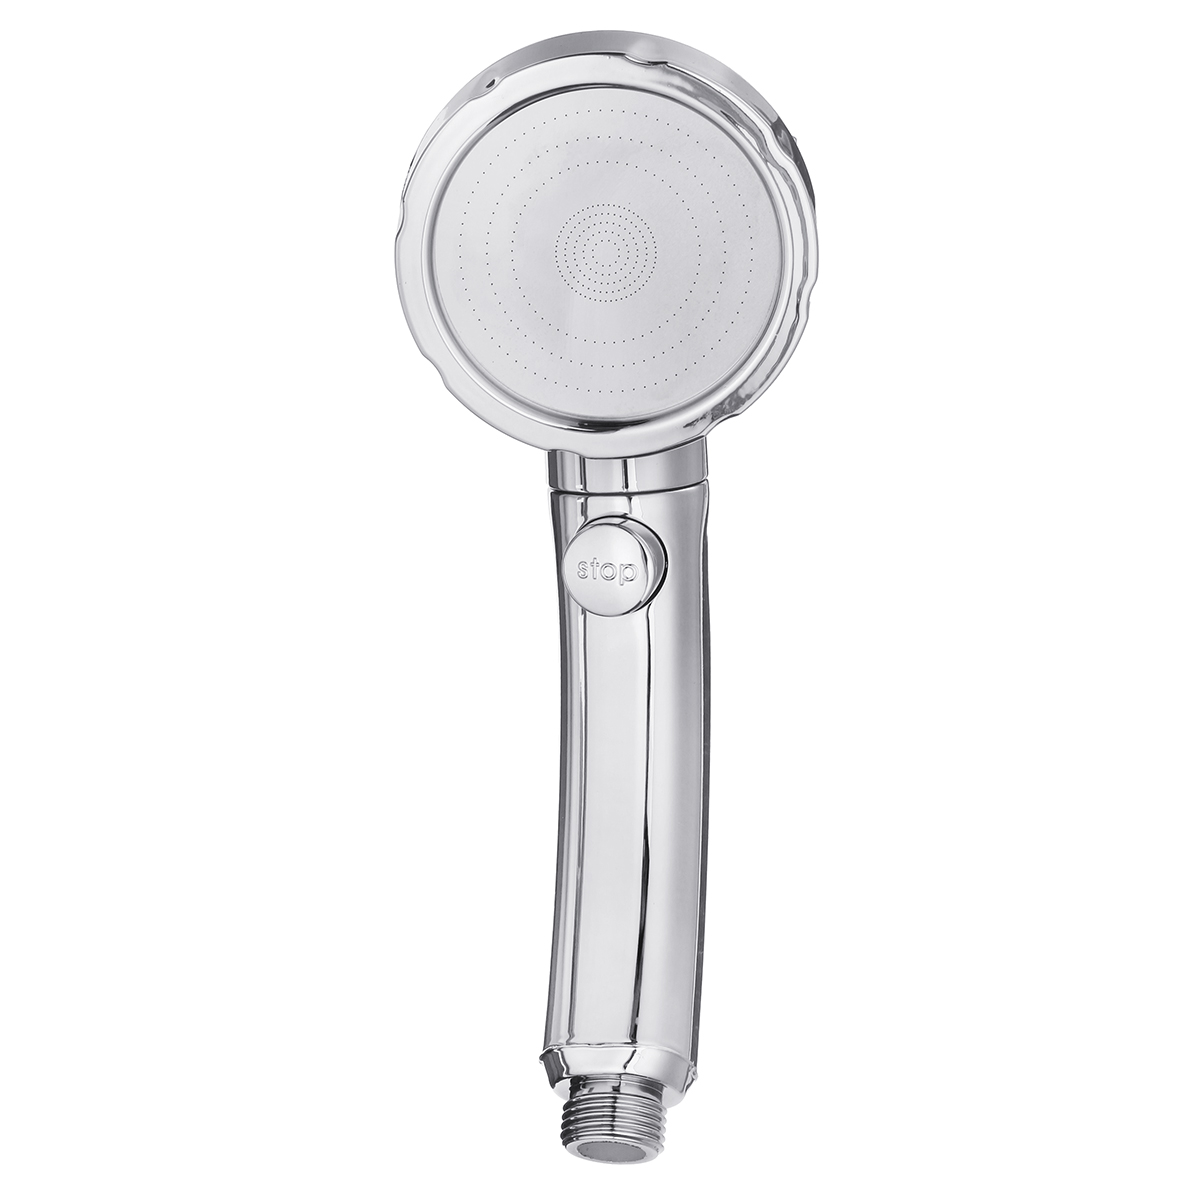 

High Pressure 3-Speeds Handheld Shower Head with ON/Off Pause Switch